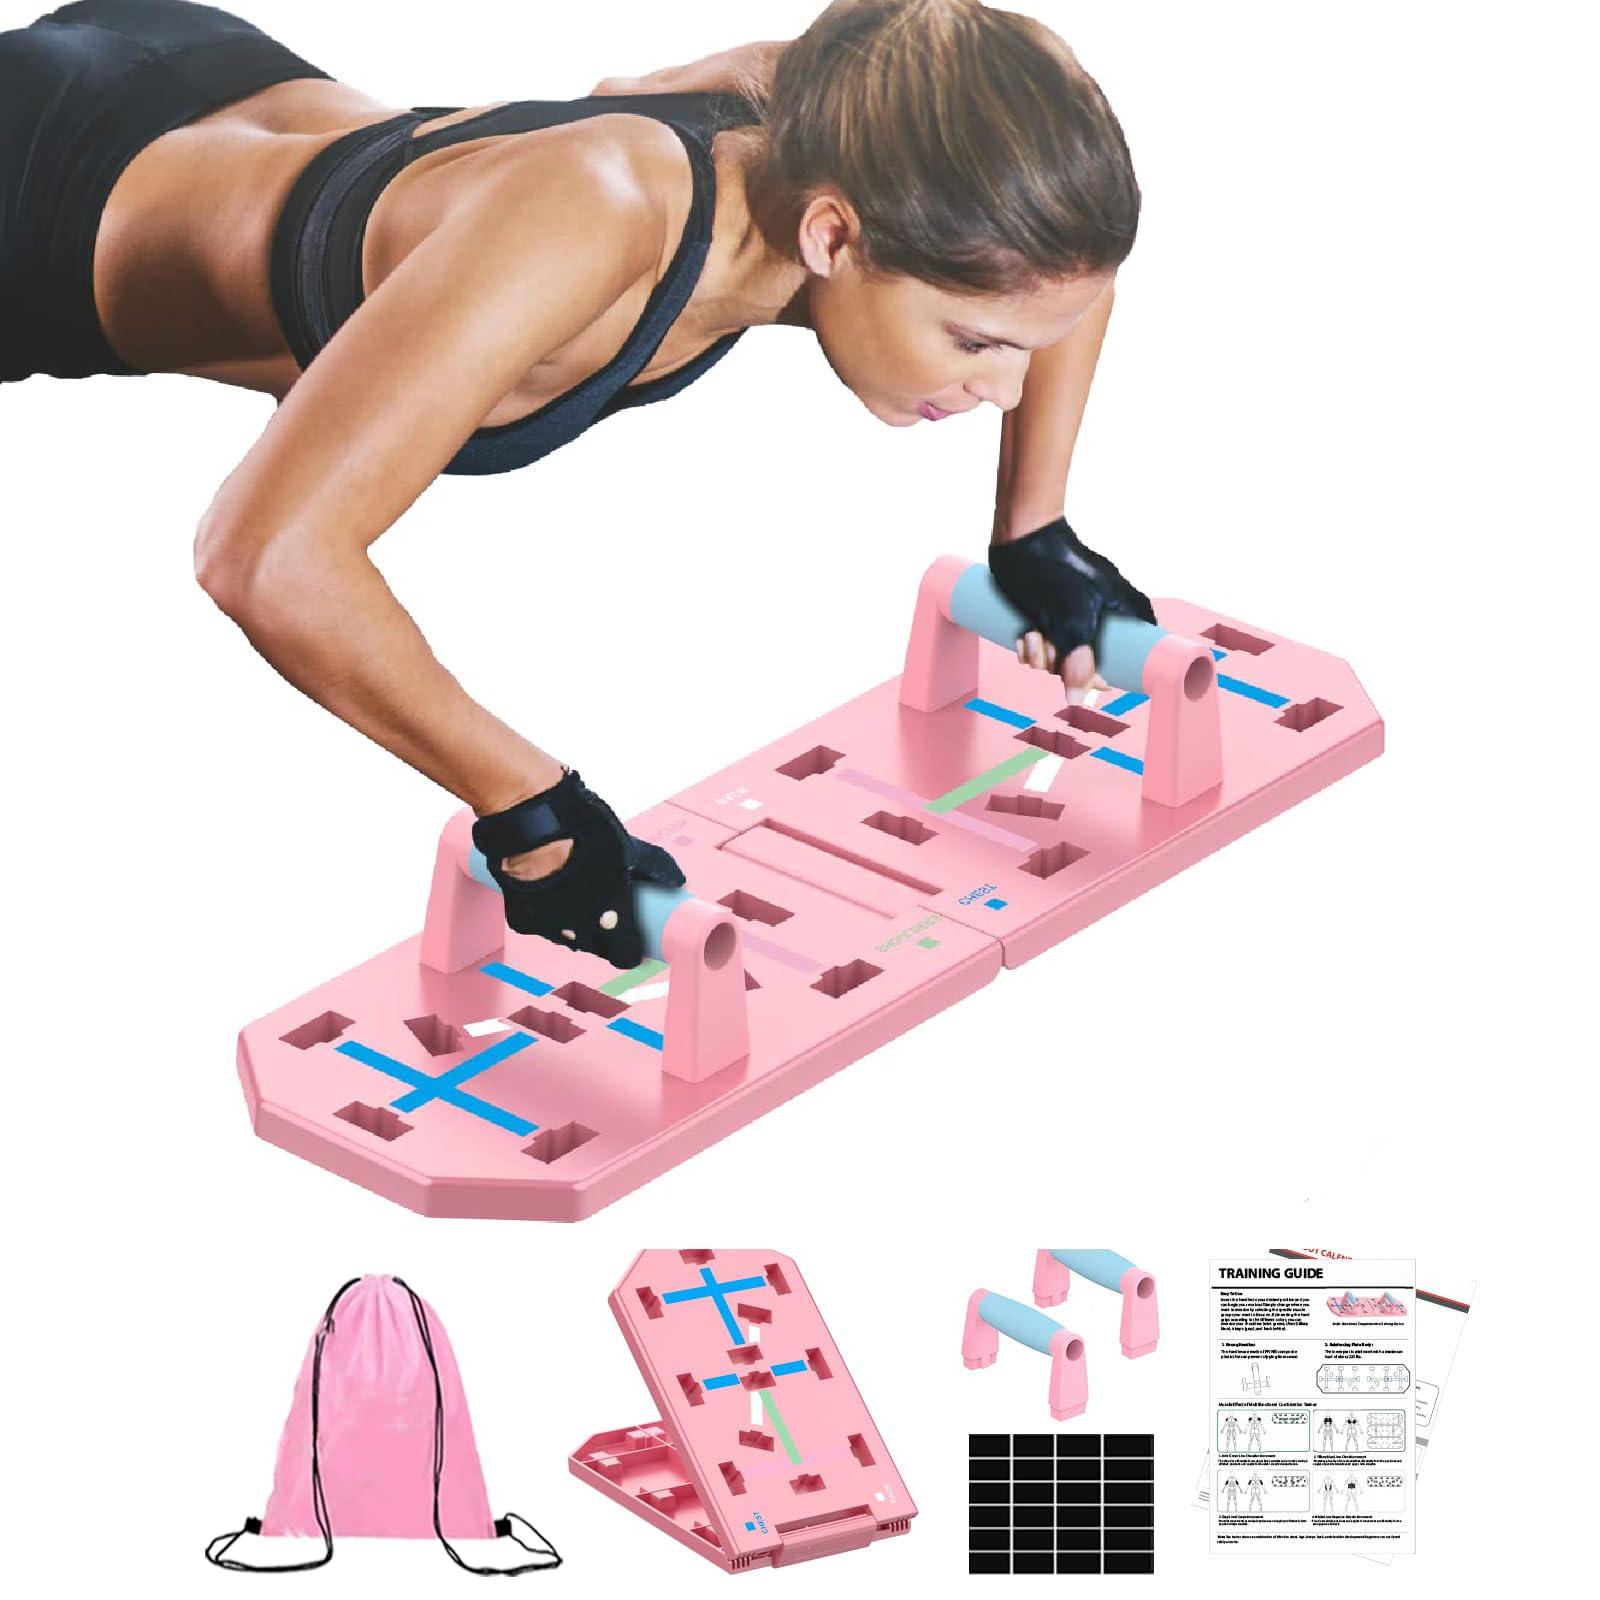 Pink Push Up Board Foldable Press Up Boards Fitness Workout Train Gym Muscle Strength Muscles Exercise Training for Men Women 0